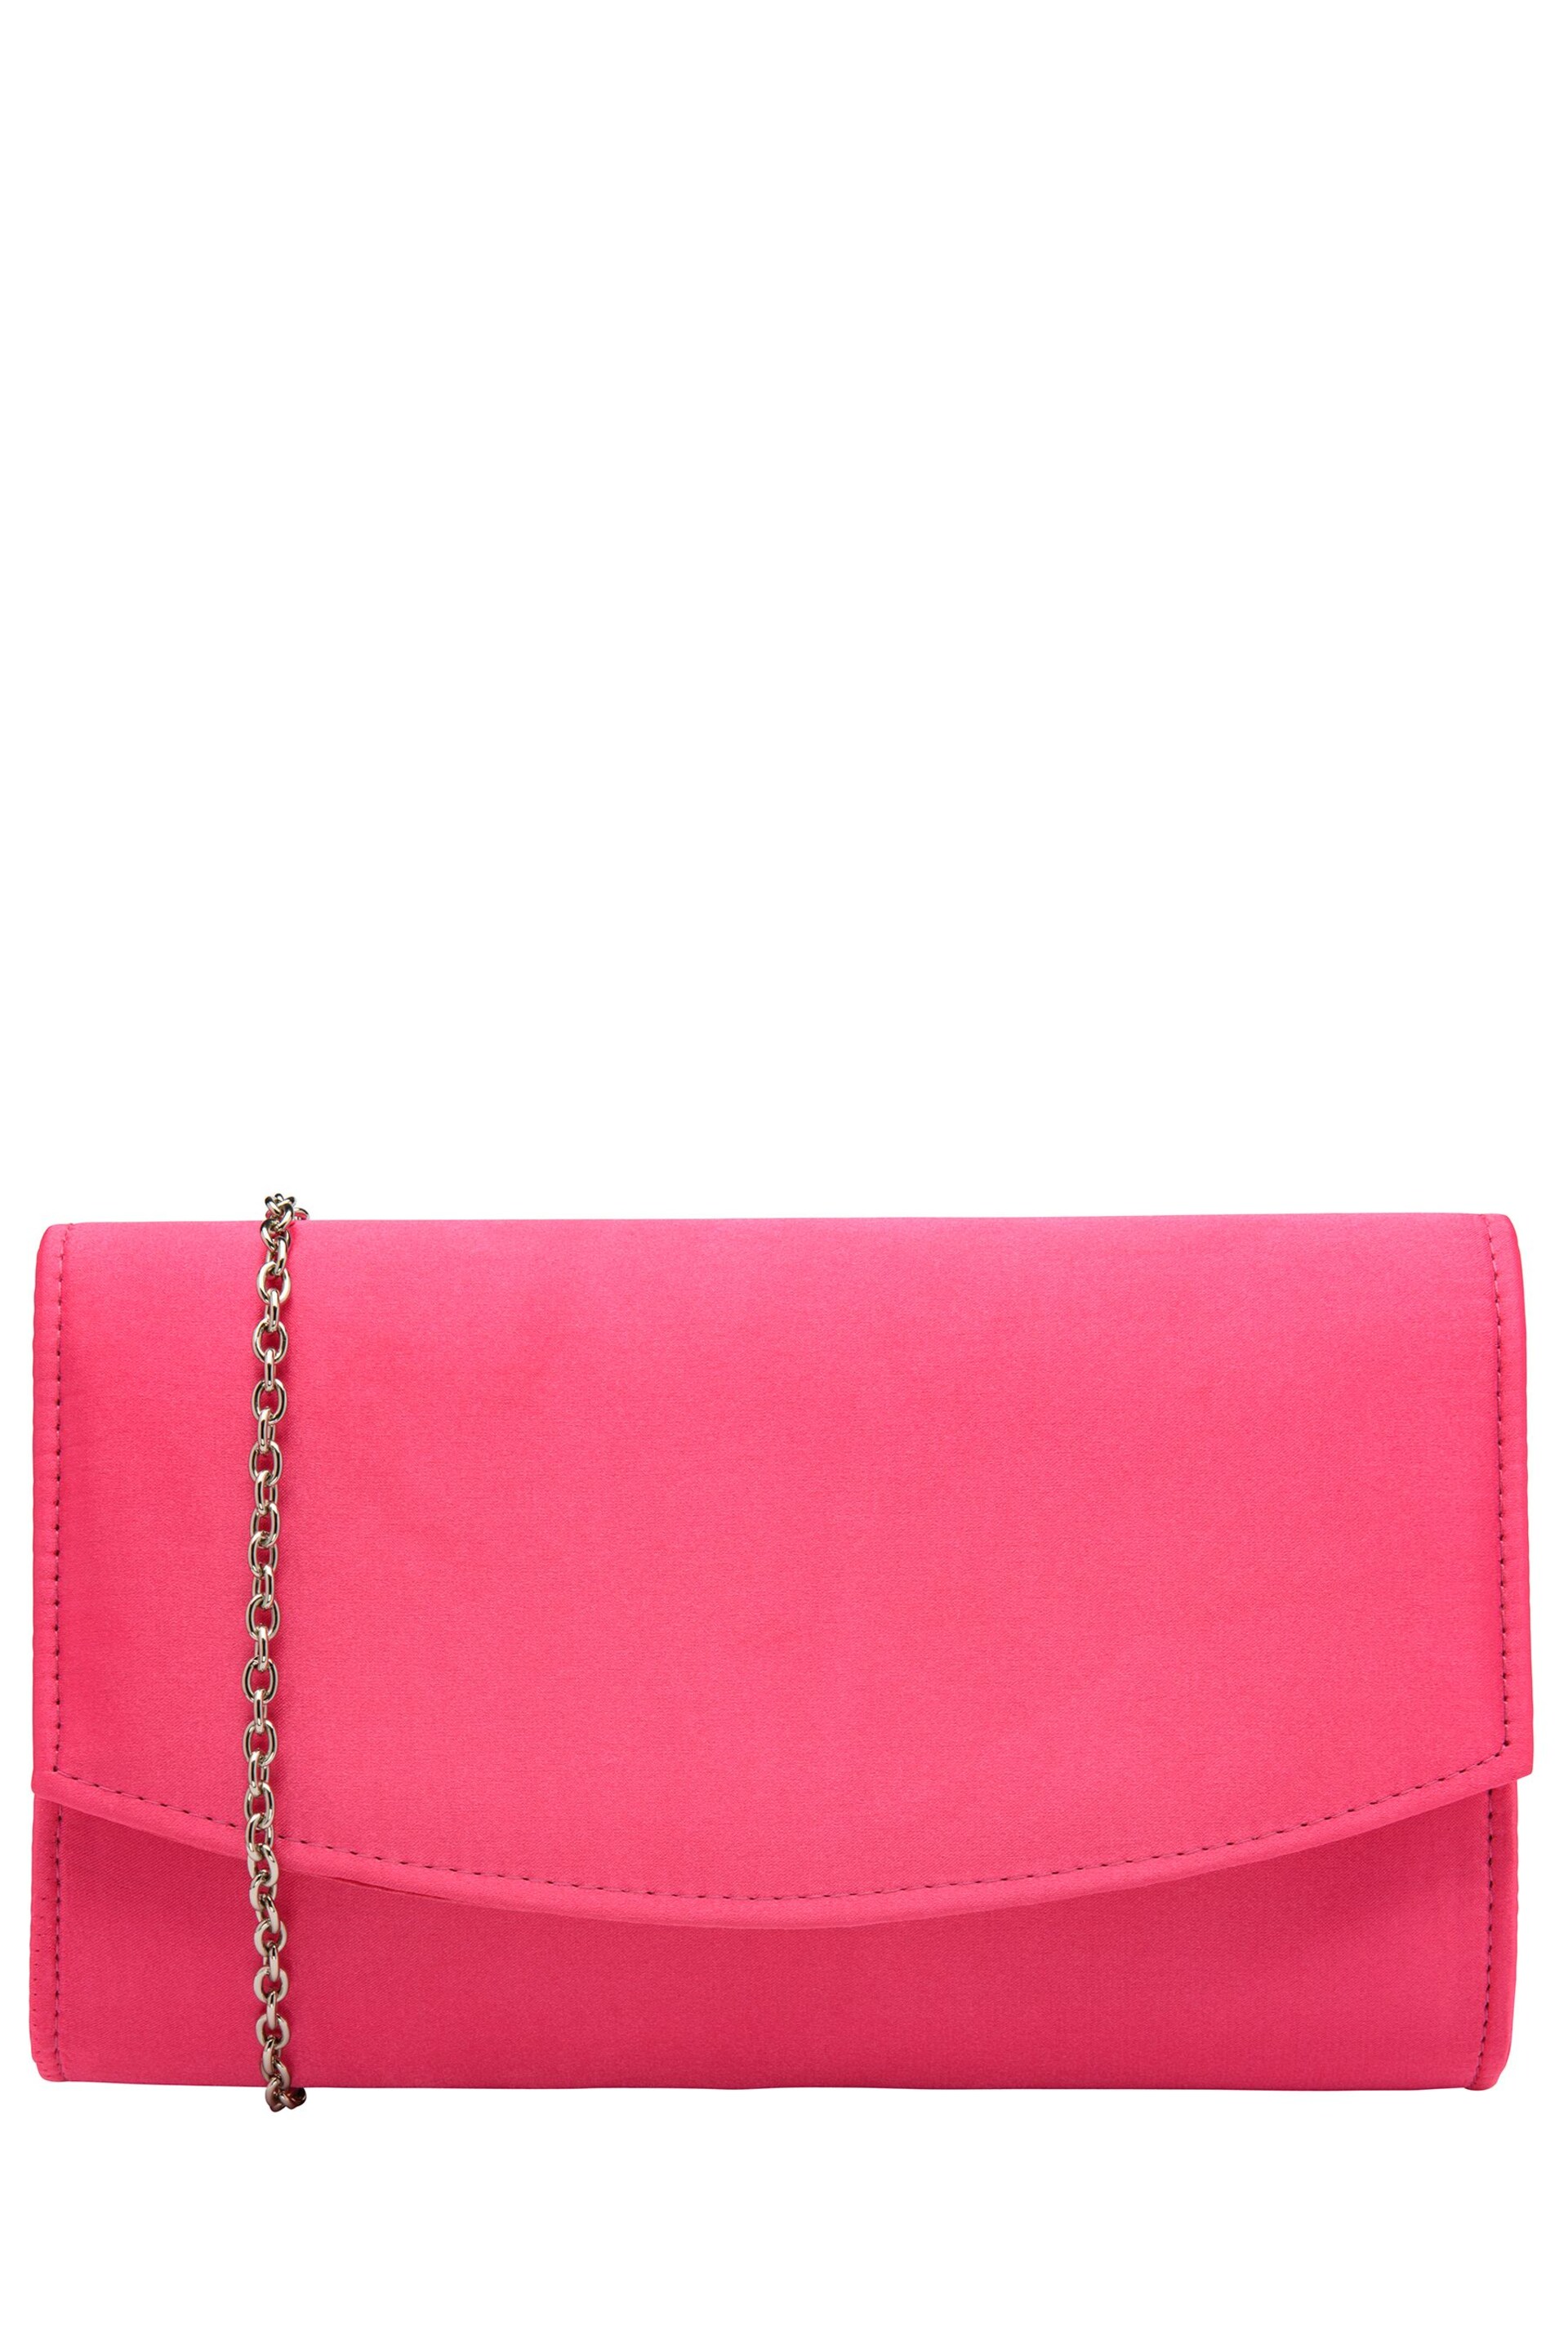 Ravel Pink Clutch Bag with Chain - Image 1 of 4